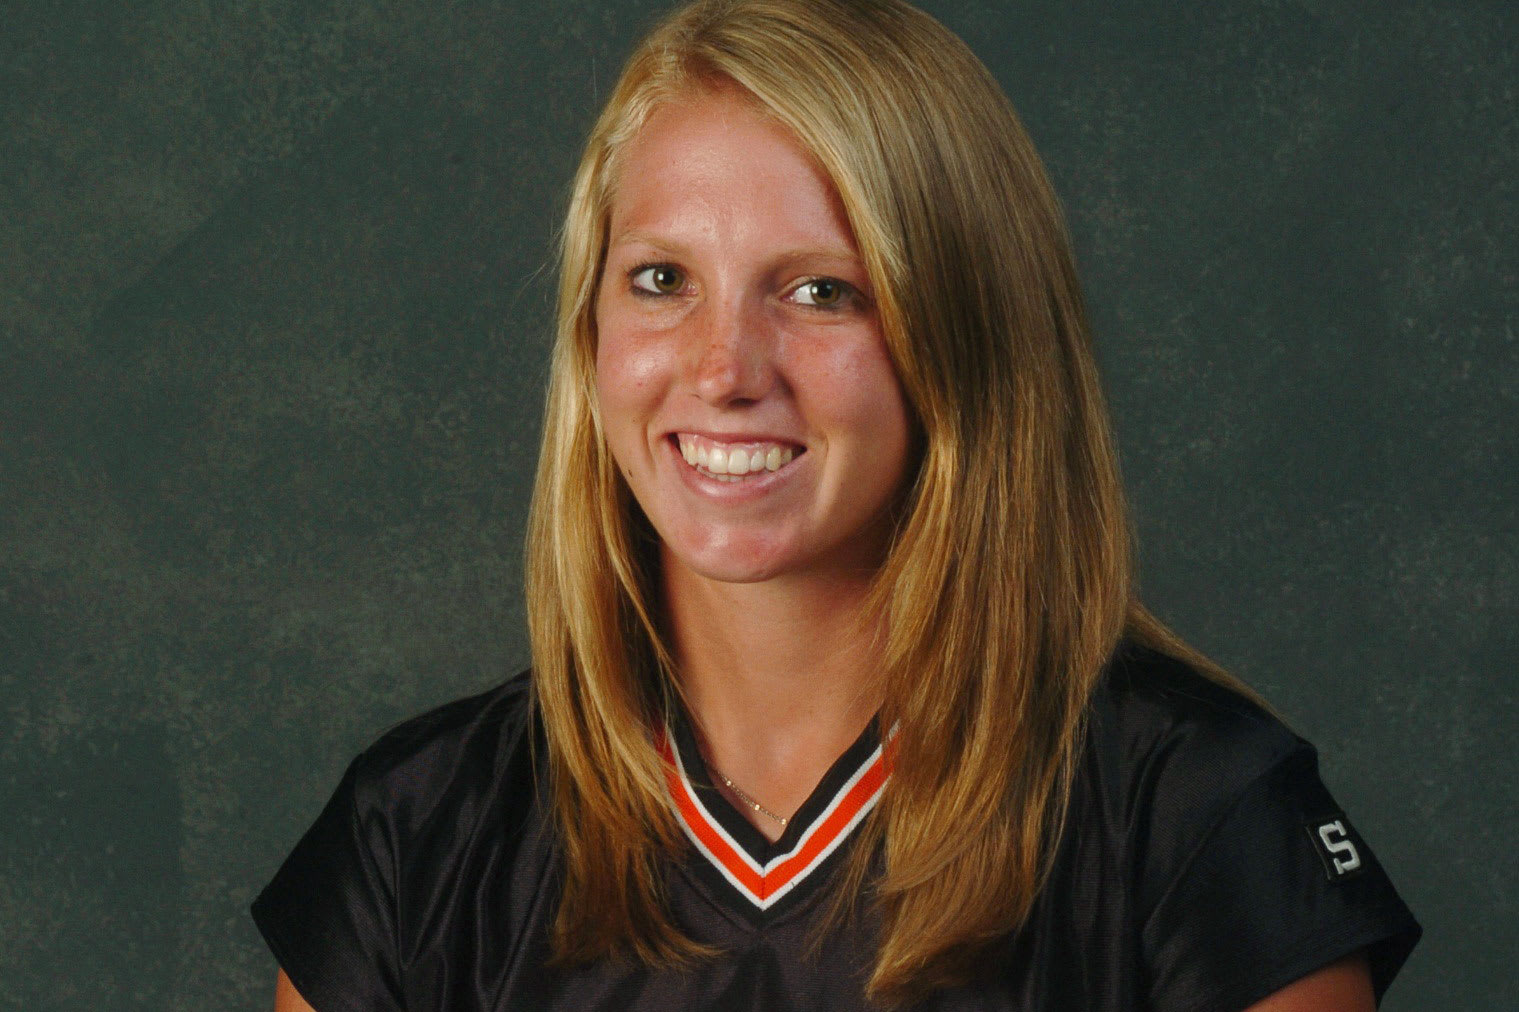 The Giants just hired Alyssa Nakken—as the first full-time female coach in ...